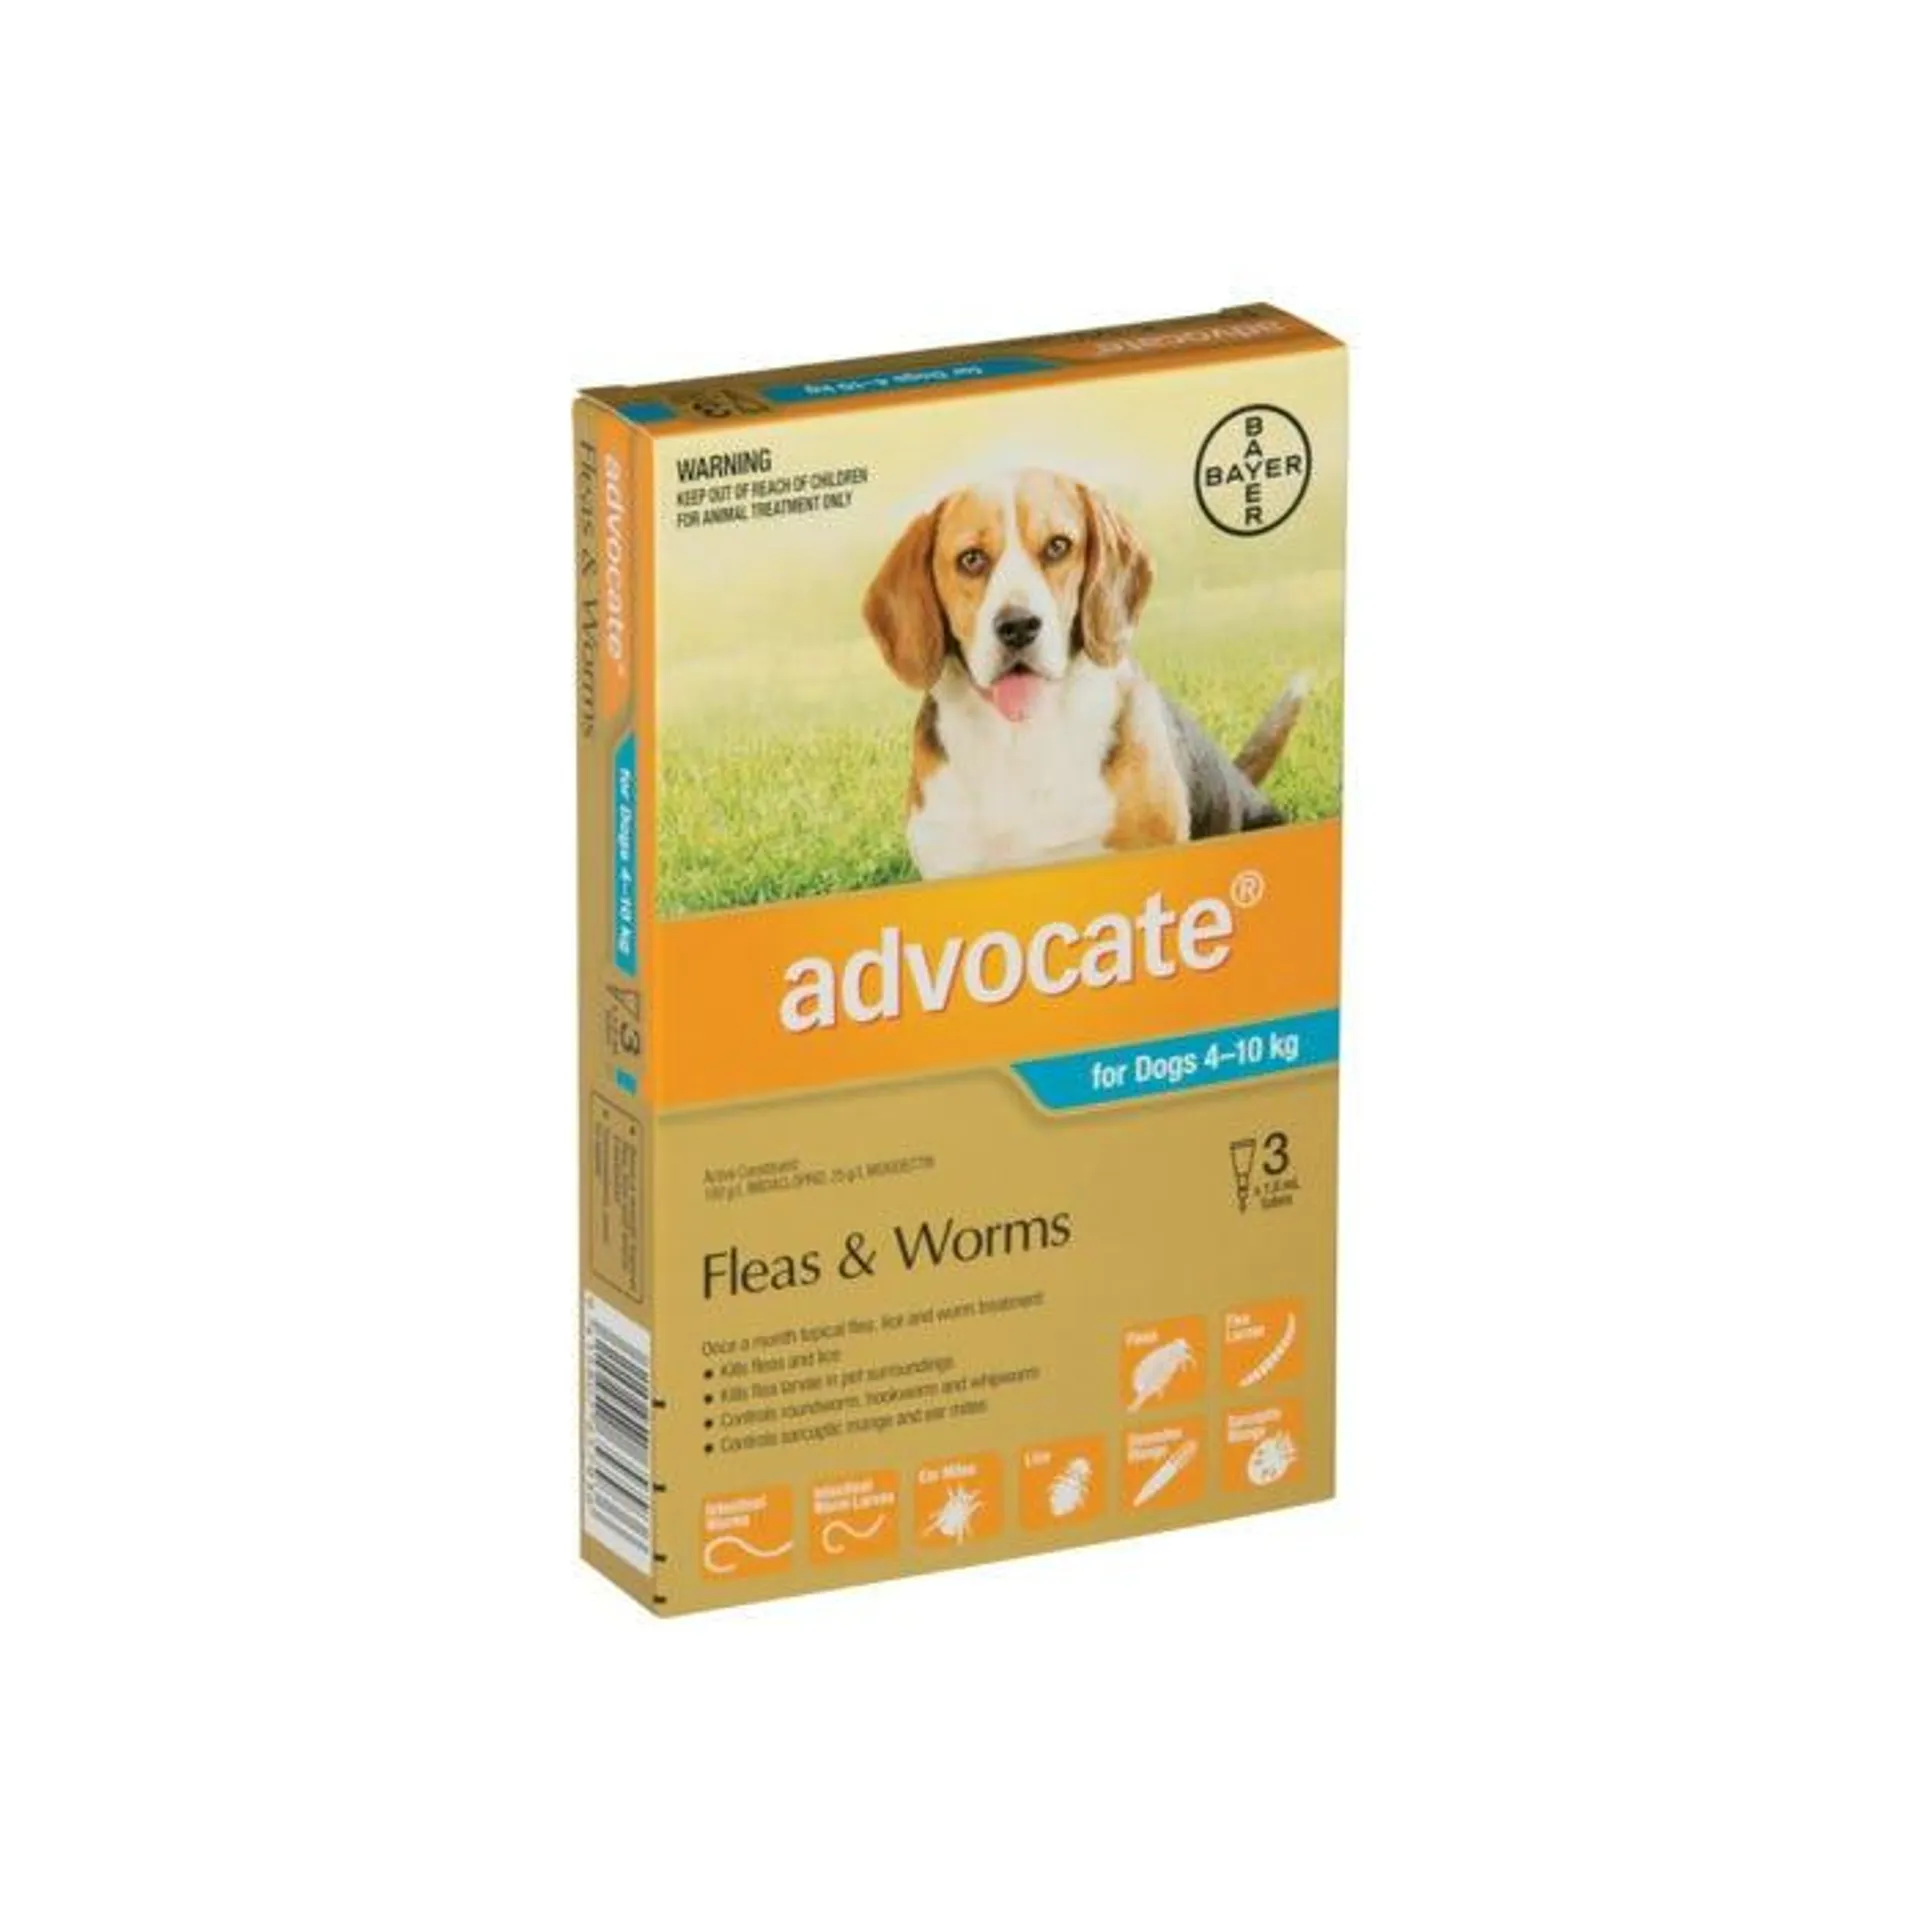 Advocate Flea Treatment For Dogs 4-10kg - 3 Pack